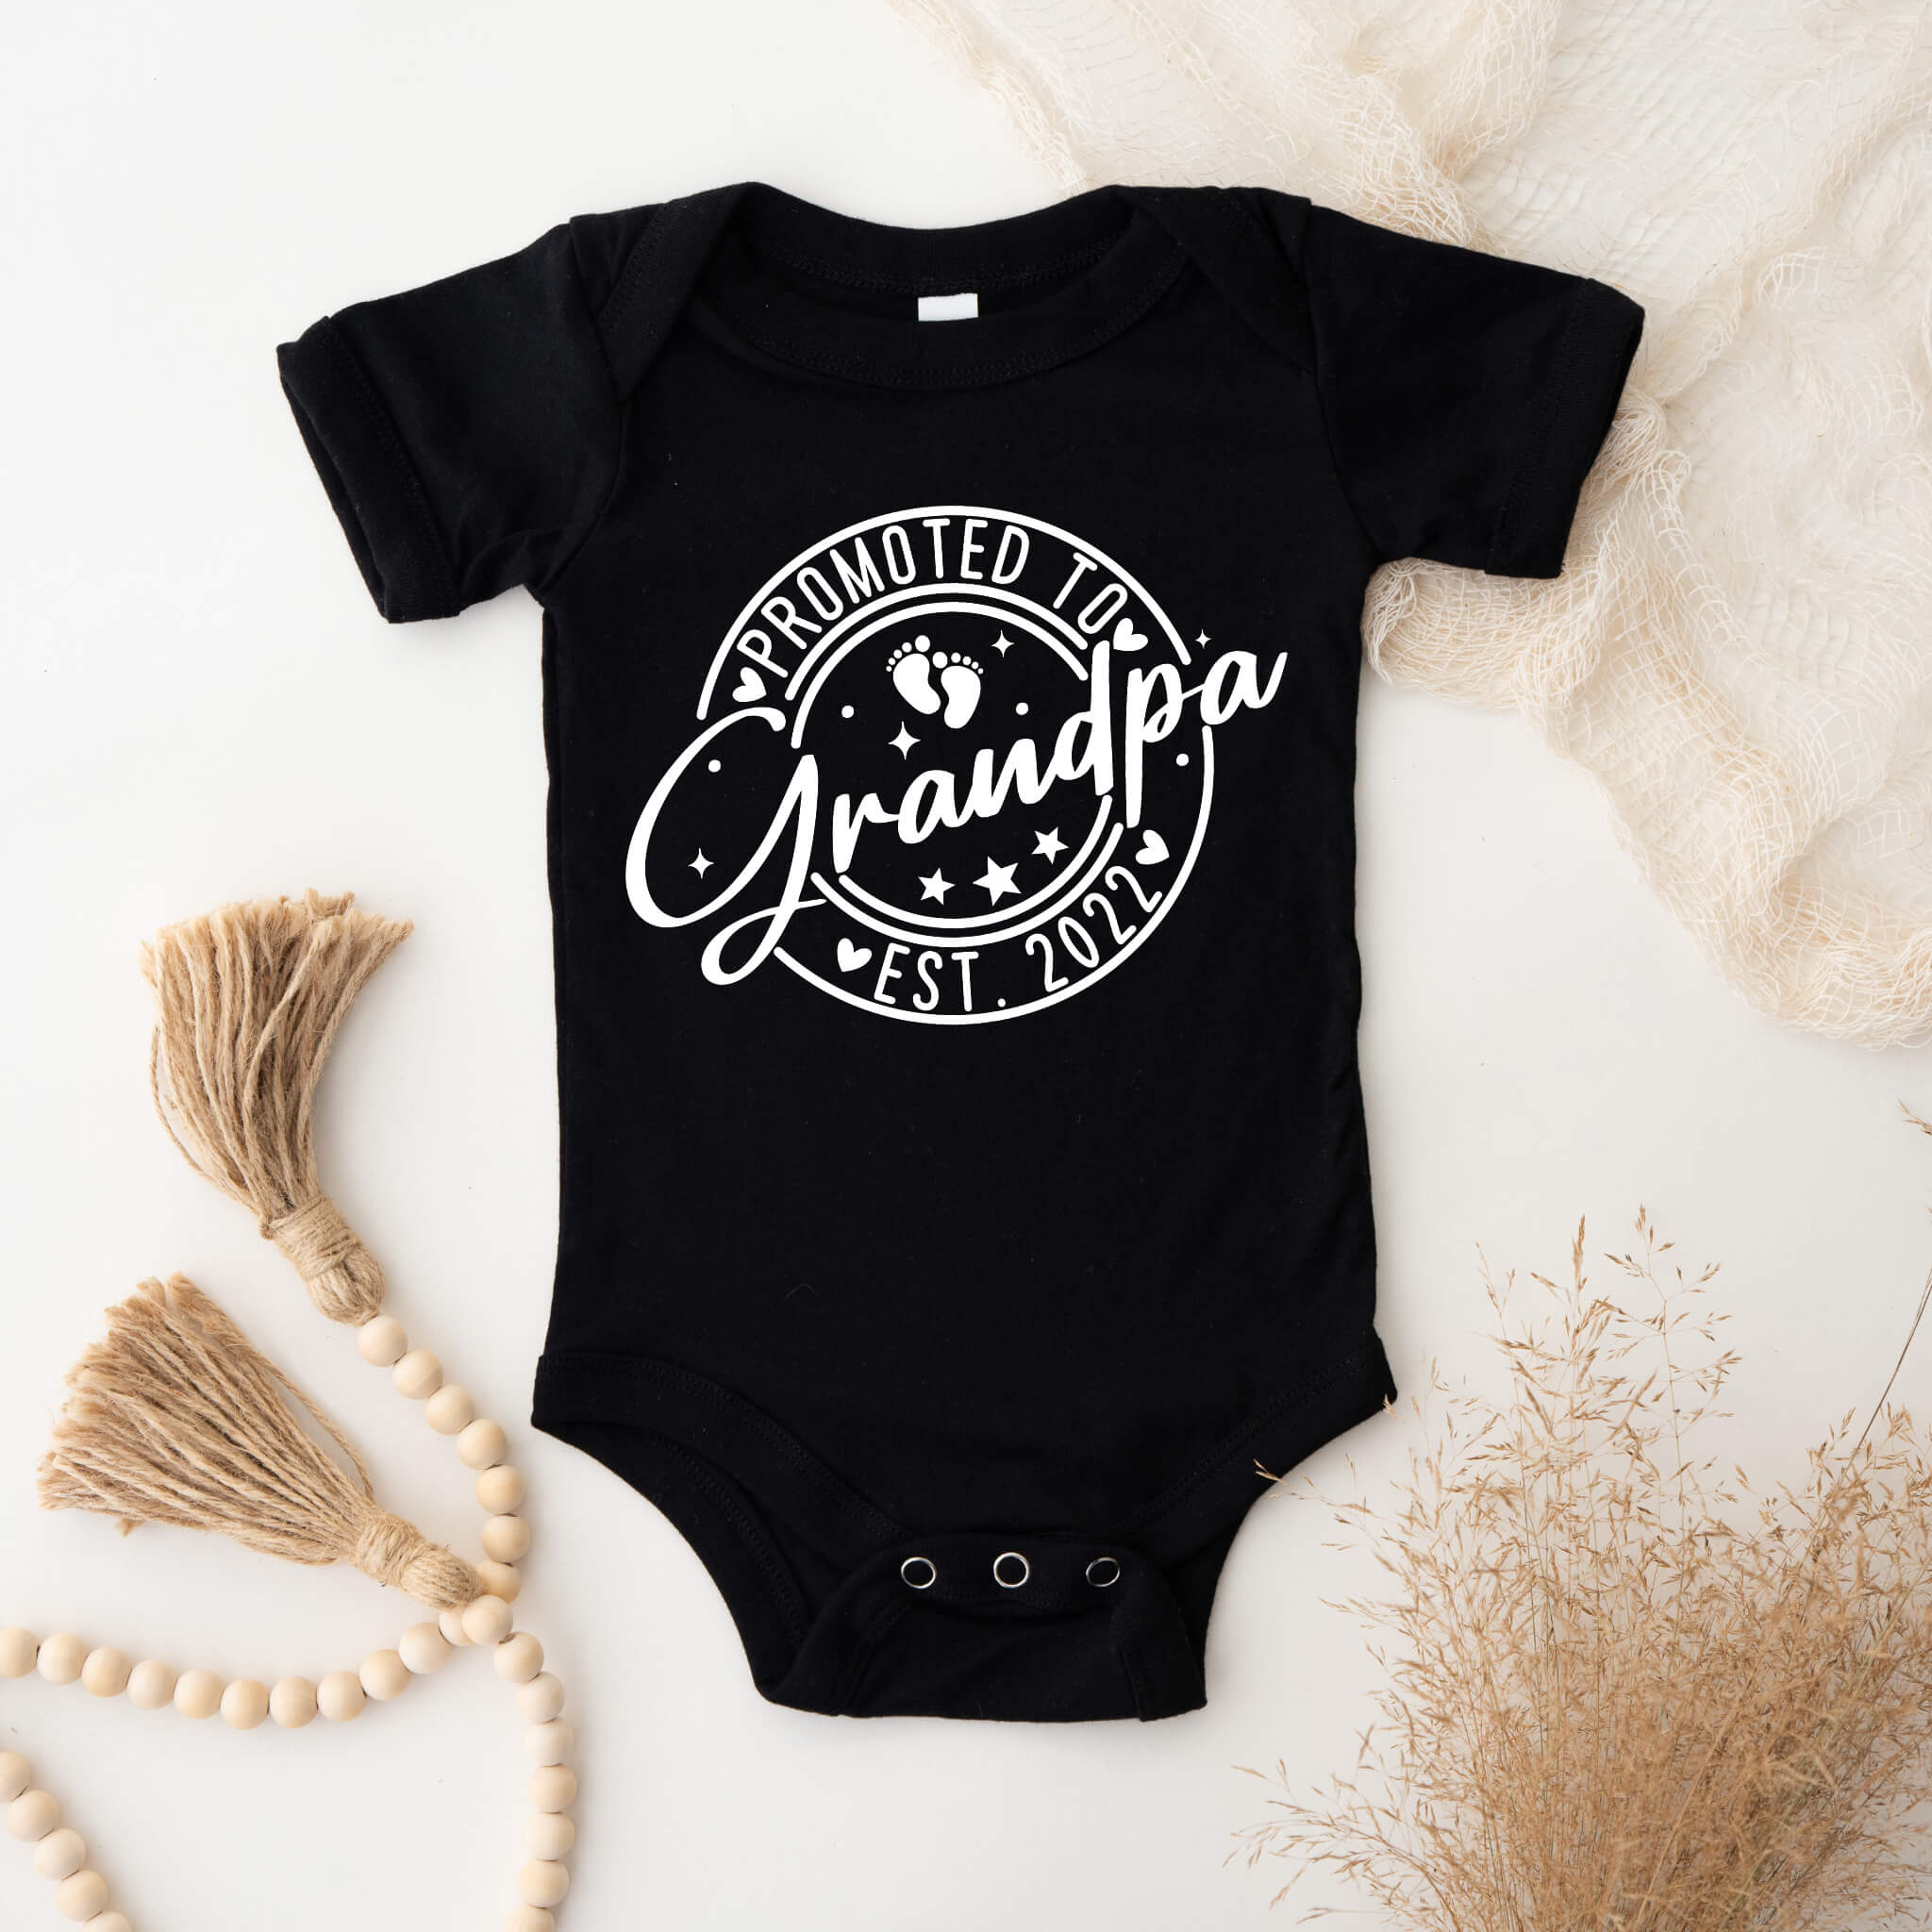 Personalized Pregnancy Announcement, Grandpa To Be, Papa, Pops, Gpa, Customized Baby Announcement Onesie, Personalized Pregnancy Announcement Gift Box, Personalized Baby Announcement Gift Box